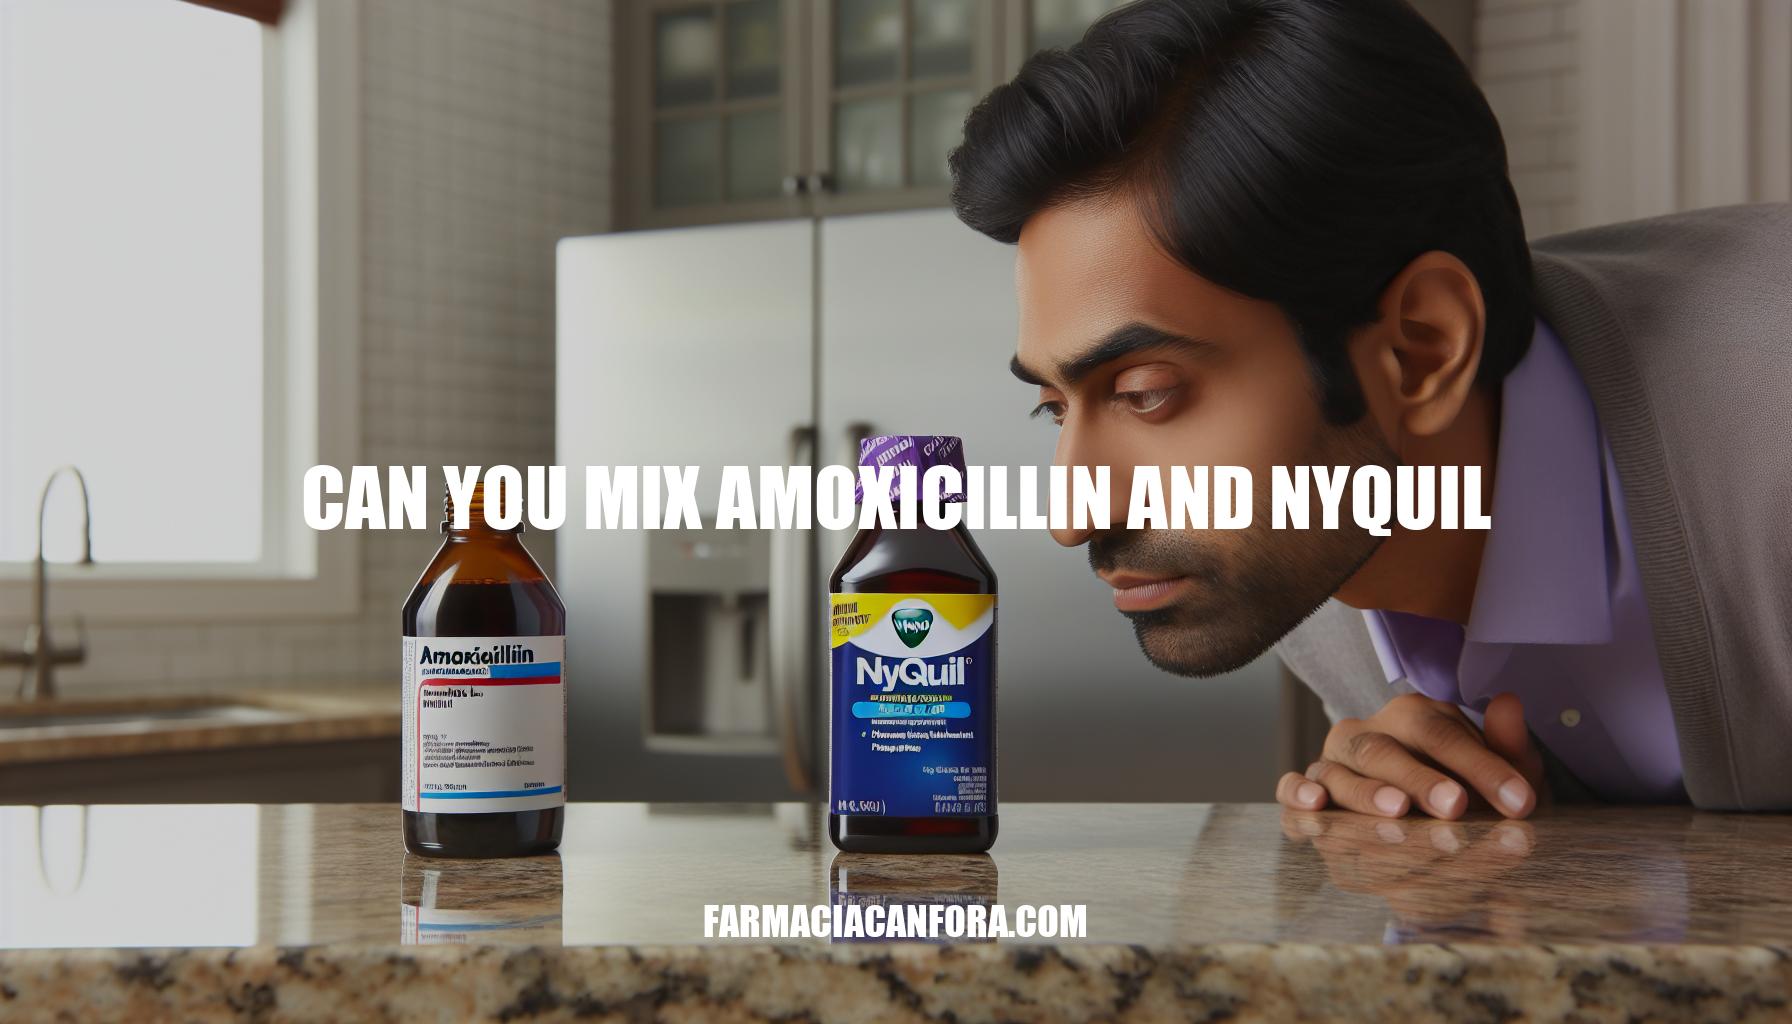 Can You Mix Amoxicillin and Nyquil: Safety Guide